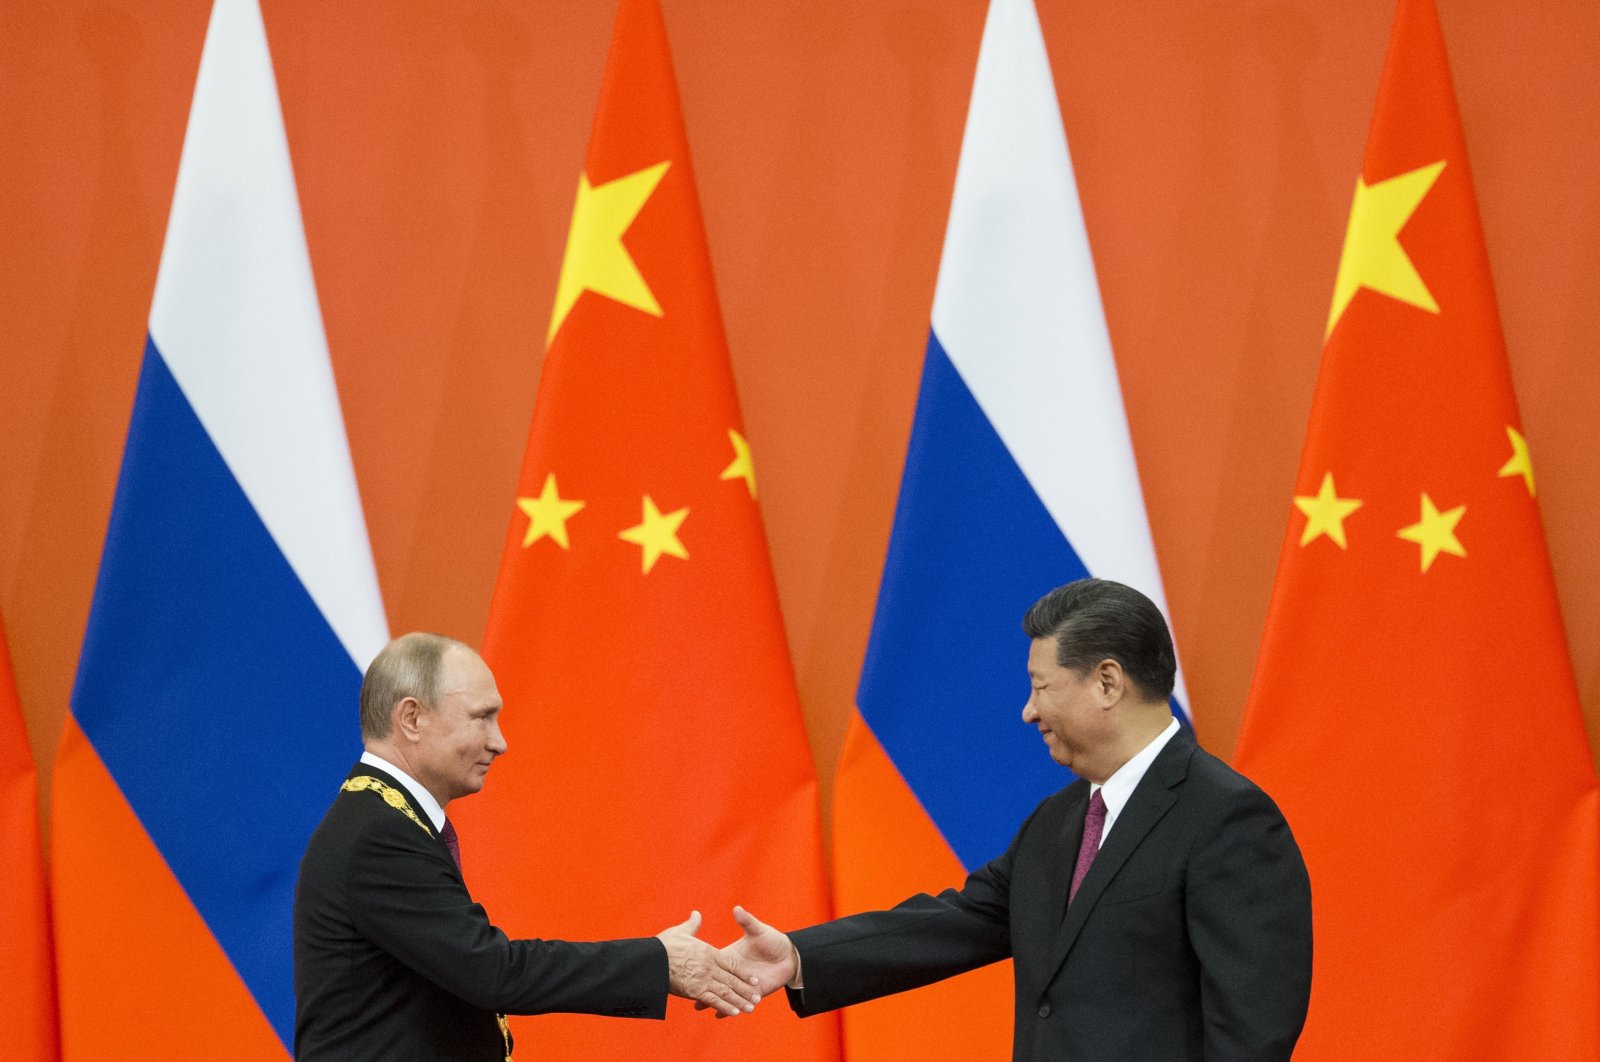 Chinese President Xi Jinping (R) and Russian President Vladimir Putin shake hands during an award ceremony at the Great Hall of the People in Beijing, China, June 8, 2018. (AP Photo)